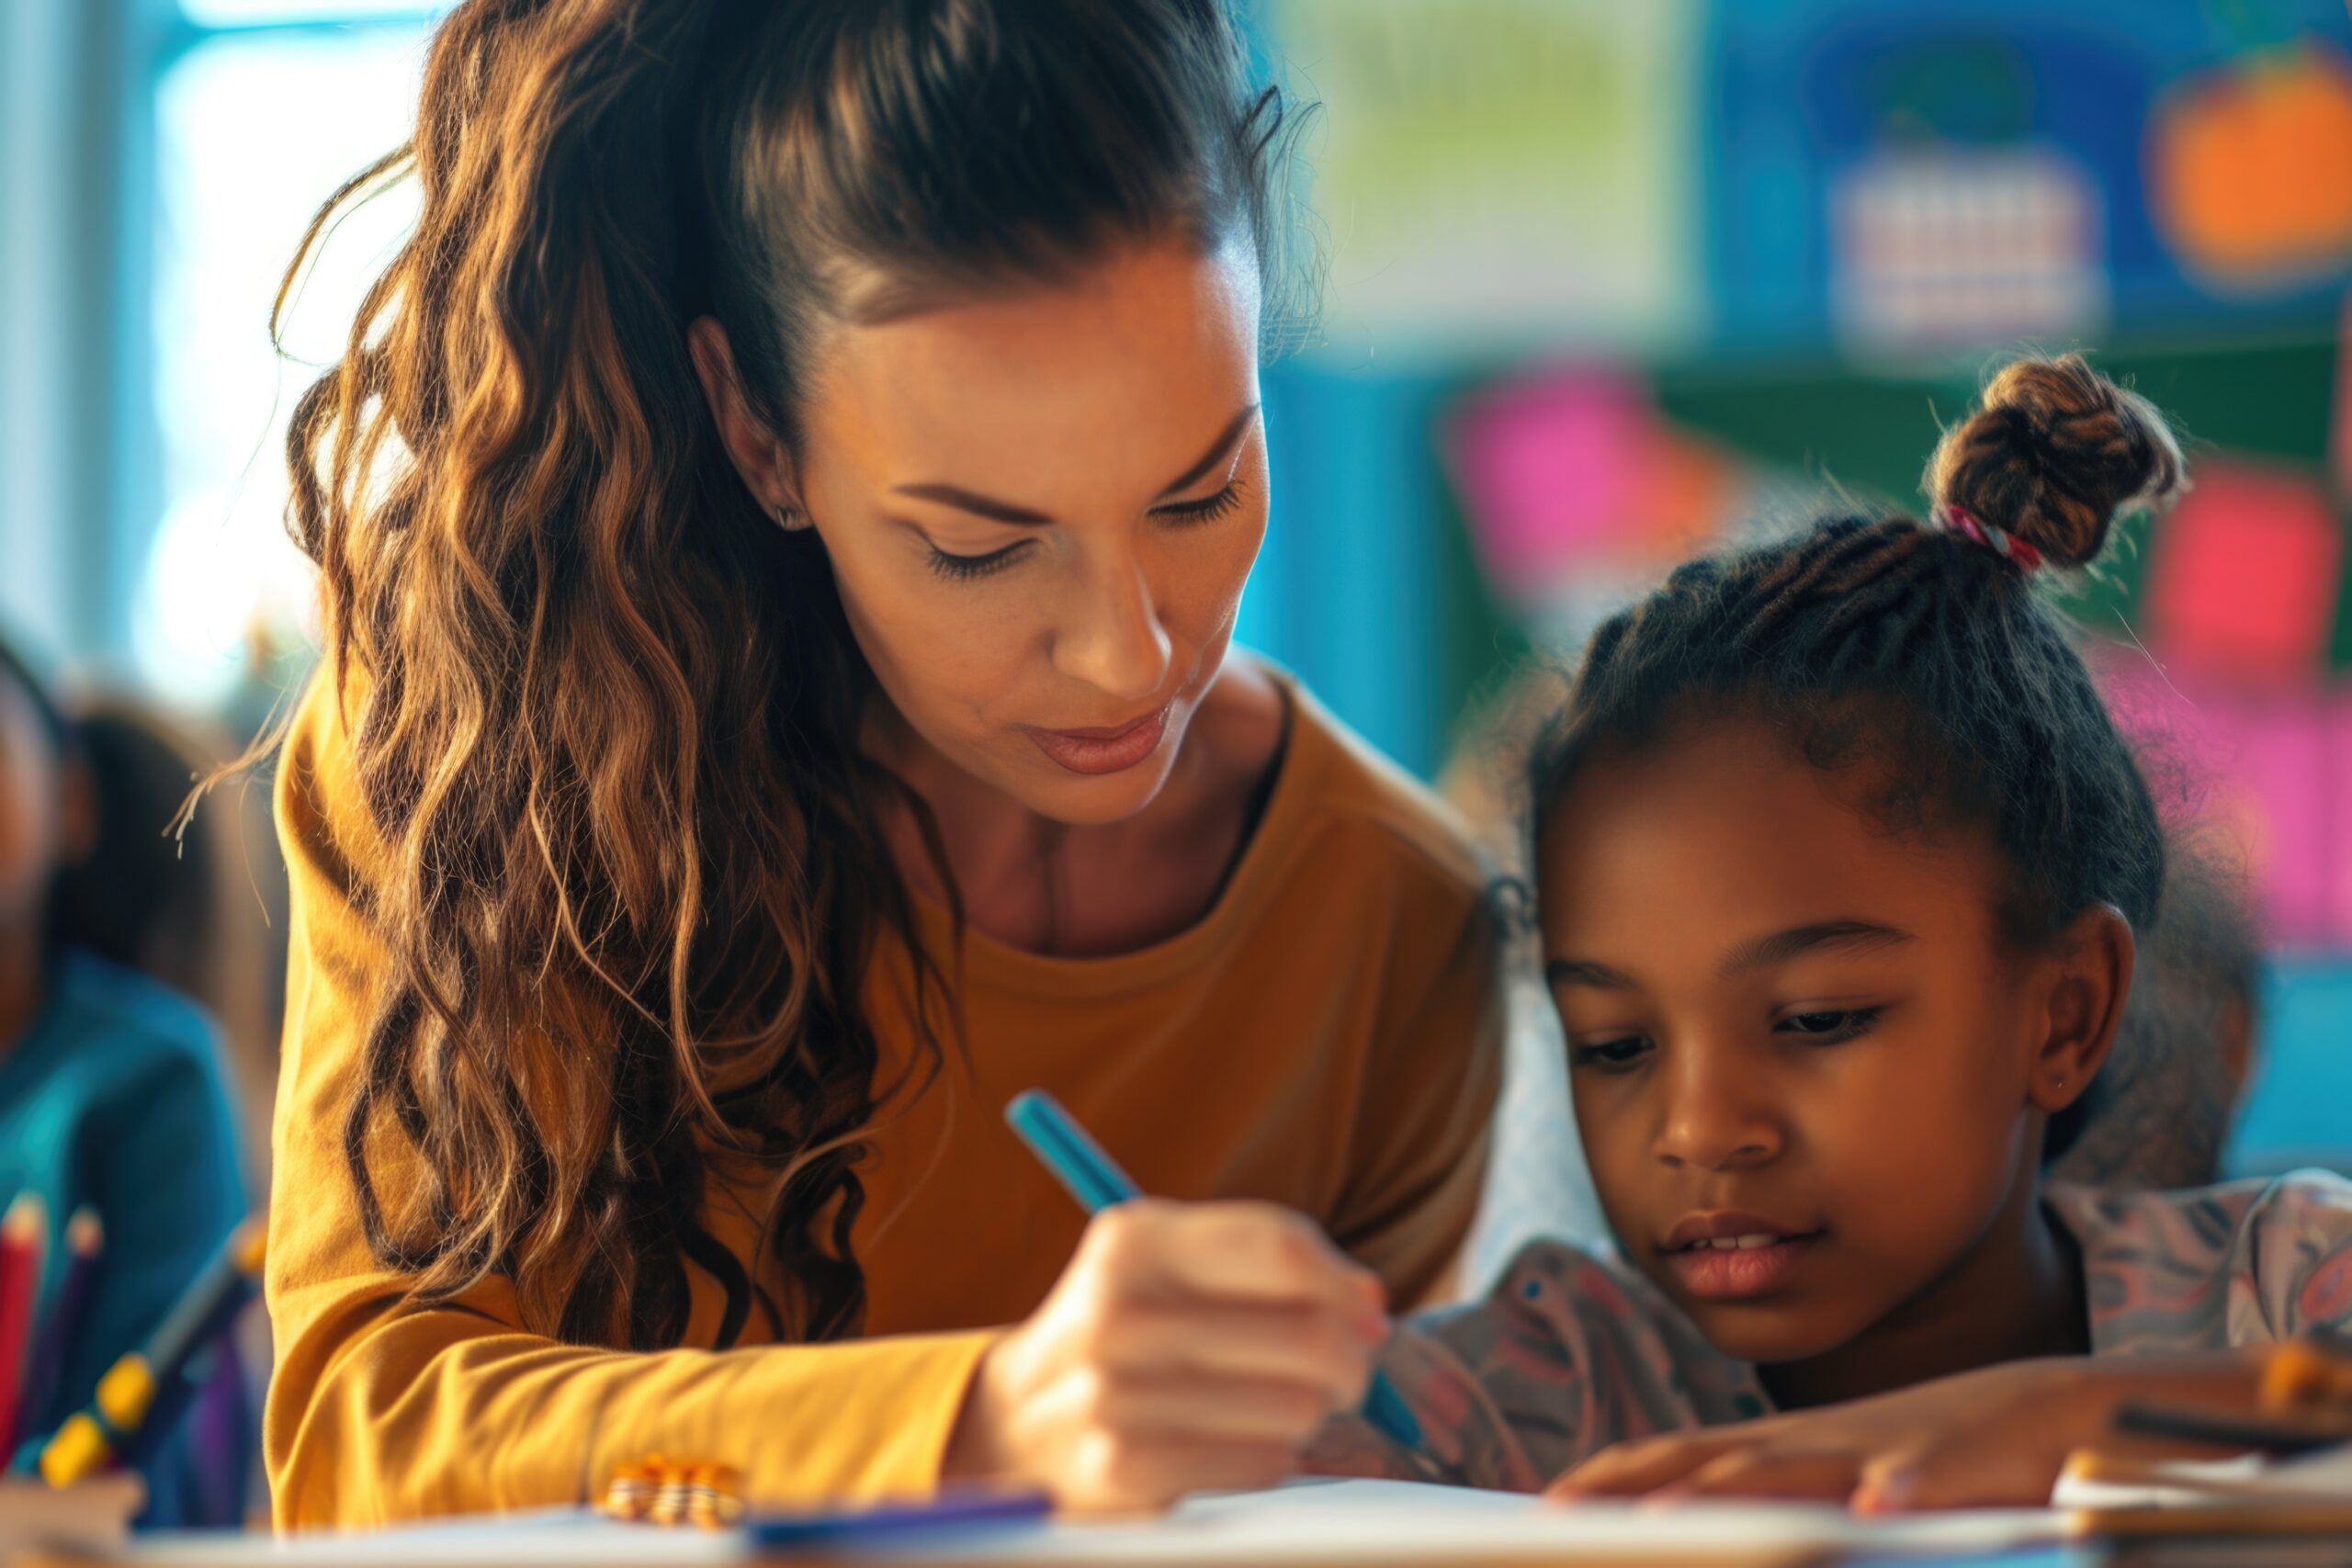 A woman is seen assisting a young girl with a pencil. This image can be used to depict education, learning, mentorship, or tutoring.